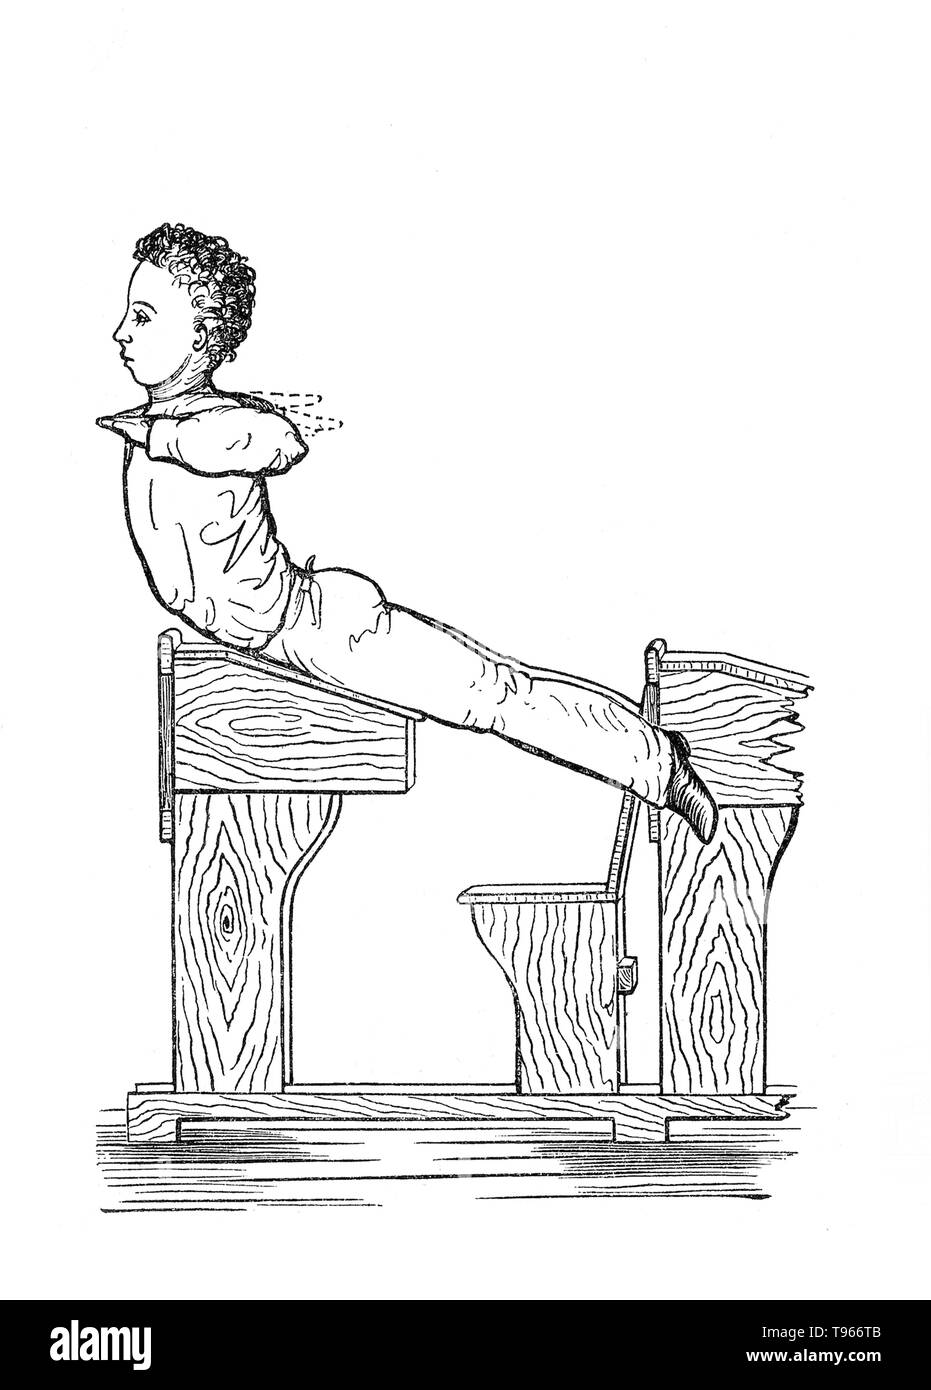 Schoolchild doing gymnastics at their desk. Gymnastics is a sport practiced by men and women that requires balance, strength, flexibility, agility, coordination, endurance and control. The movements involved in gymnastics contribute to the development of the arms, legs, shoulders, back, chest and abdominal muscle groups. Alertness, precision, daring, self-confidence and self-discipline are mental traits that can also be developed through gymnastics. Stock Photo